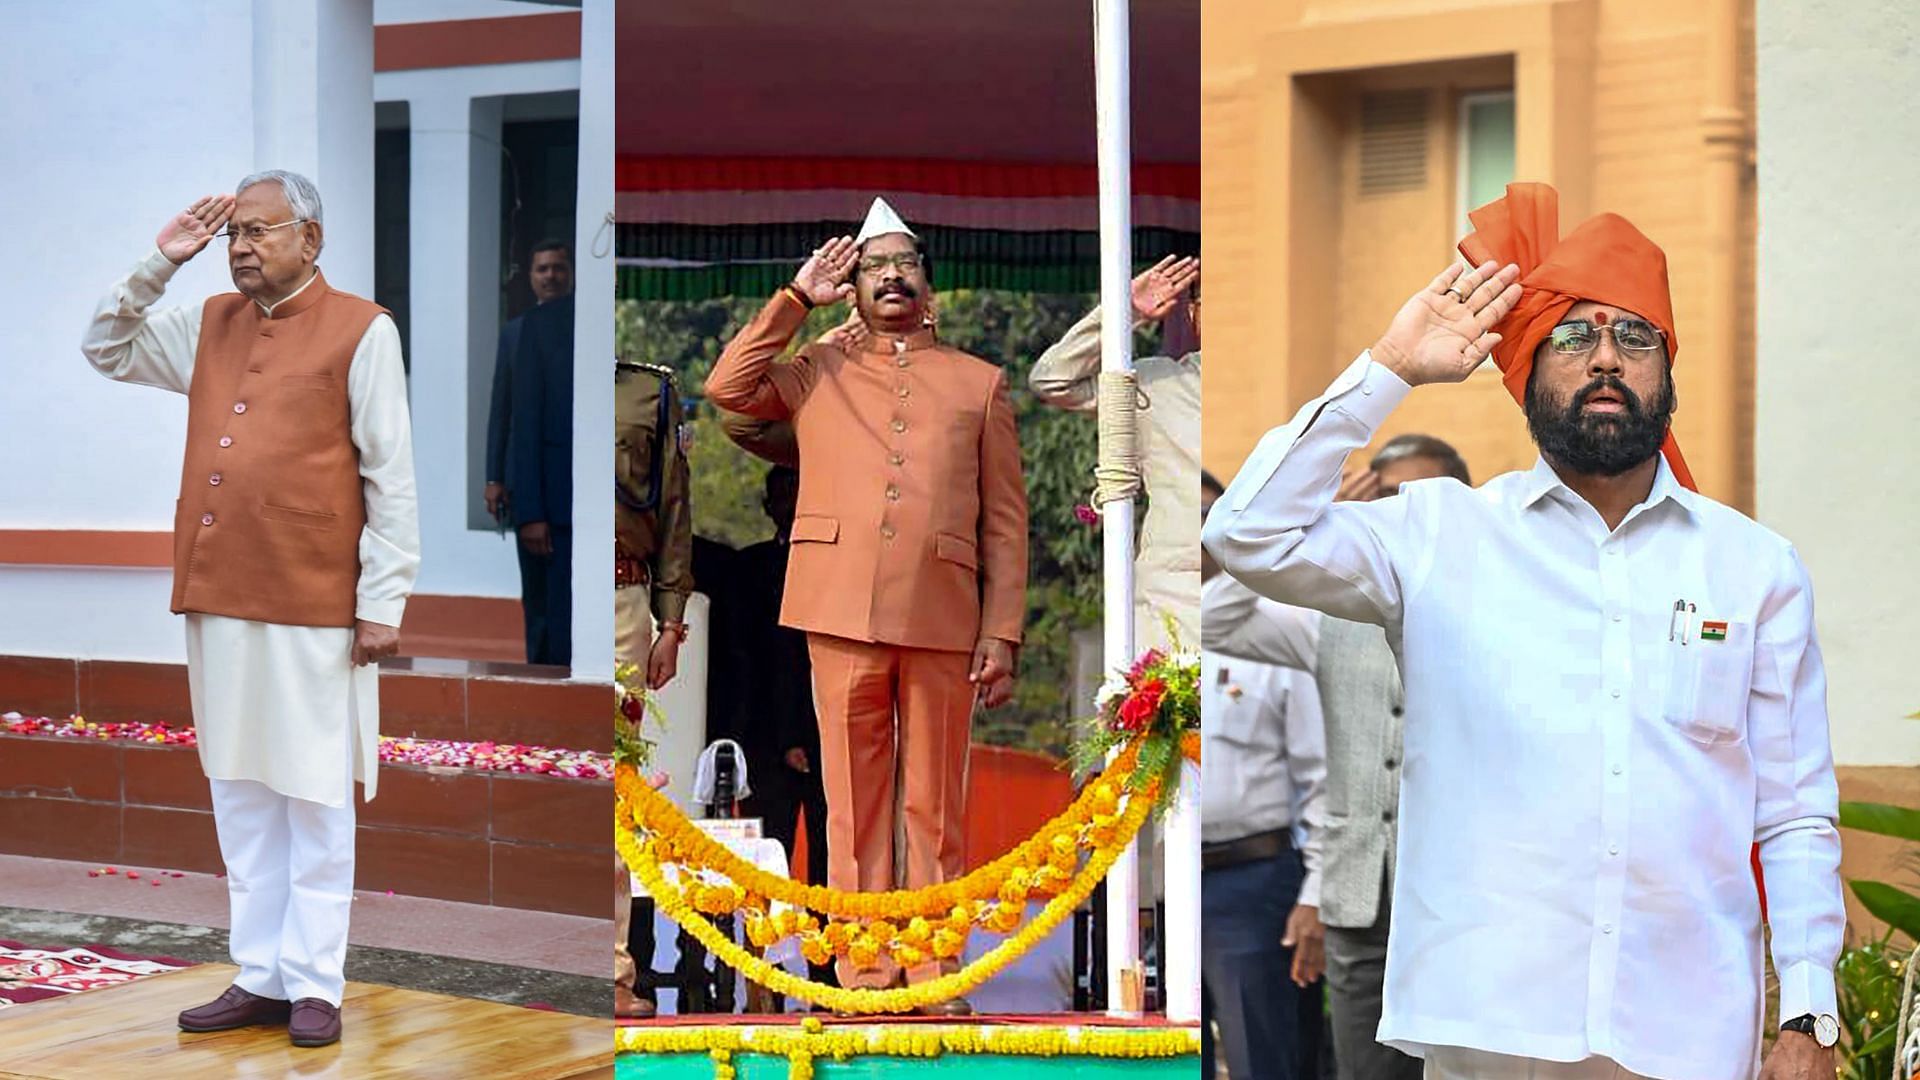 <div class="paragraphs"><p>The chief ministers of Uttar Pradesh, Madhya Pradesh, Himachal Pradesh, and Maharashtra, as well as other states, participated in the celebrations on India's 74th Republic Day.</p></div>